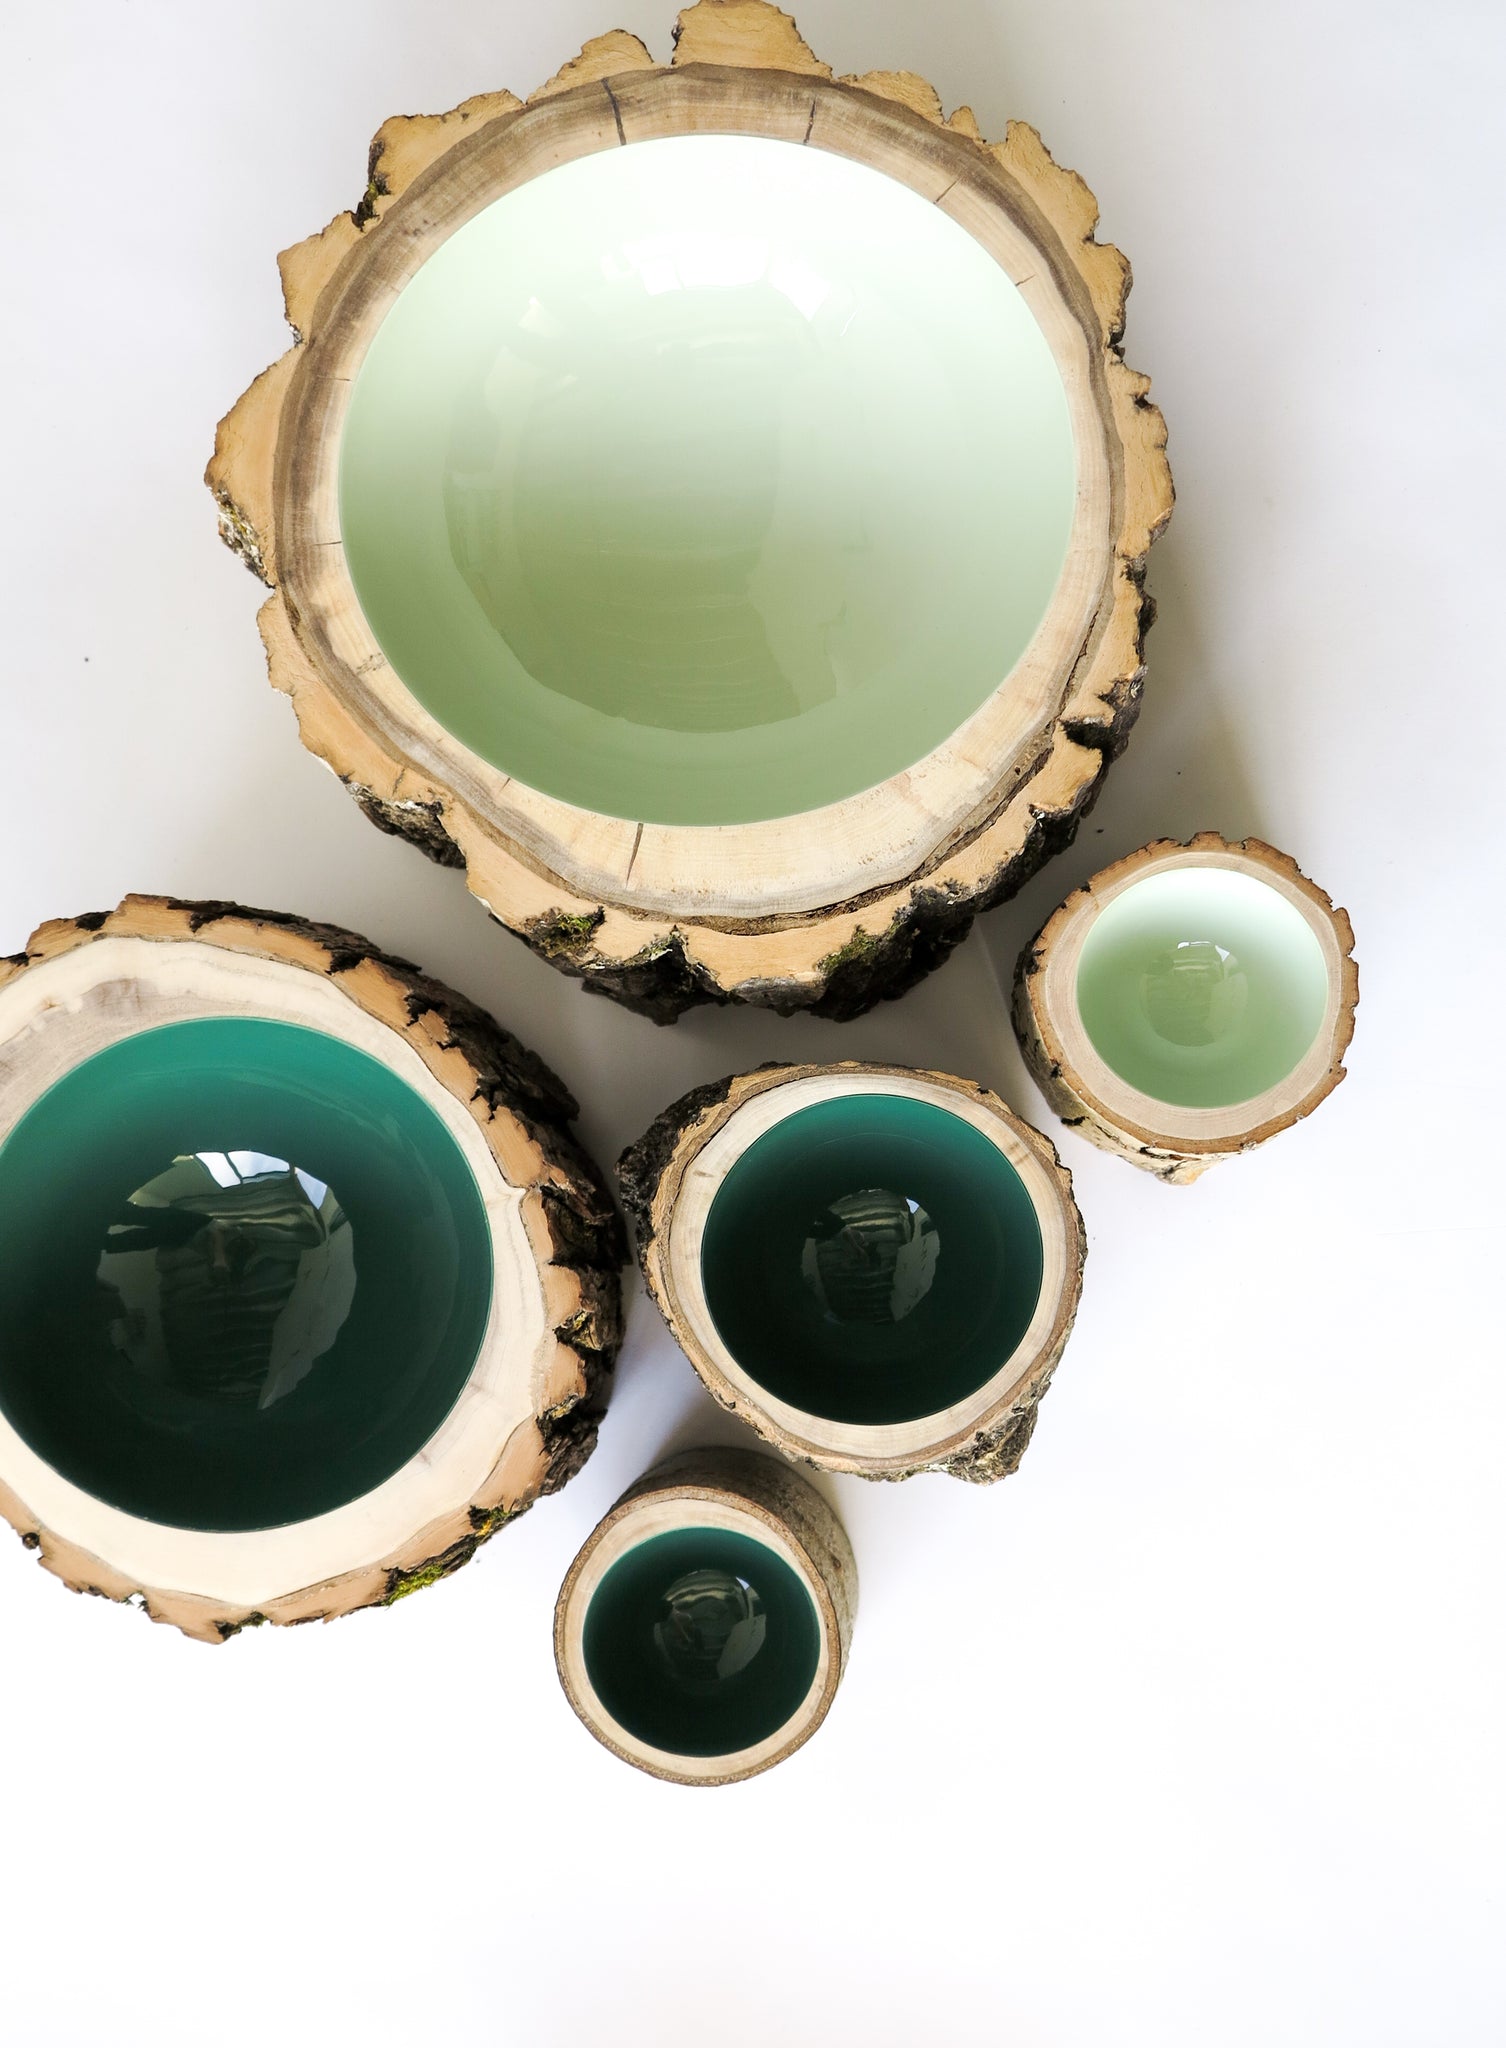 Top view of a group of 5 wooden Log Bowls by Loyal Loot.  Colours include shades of dark and light green.